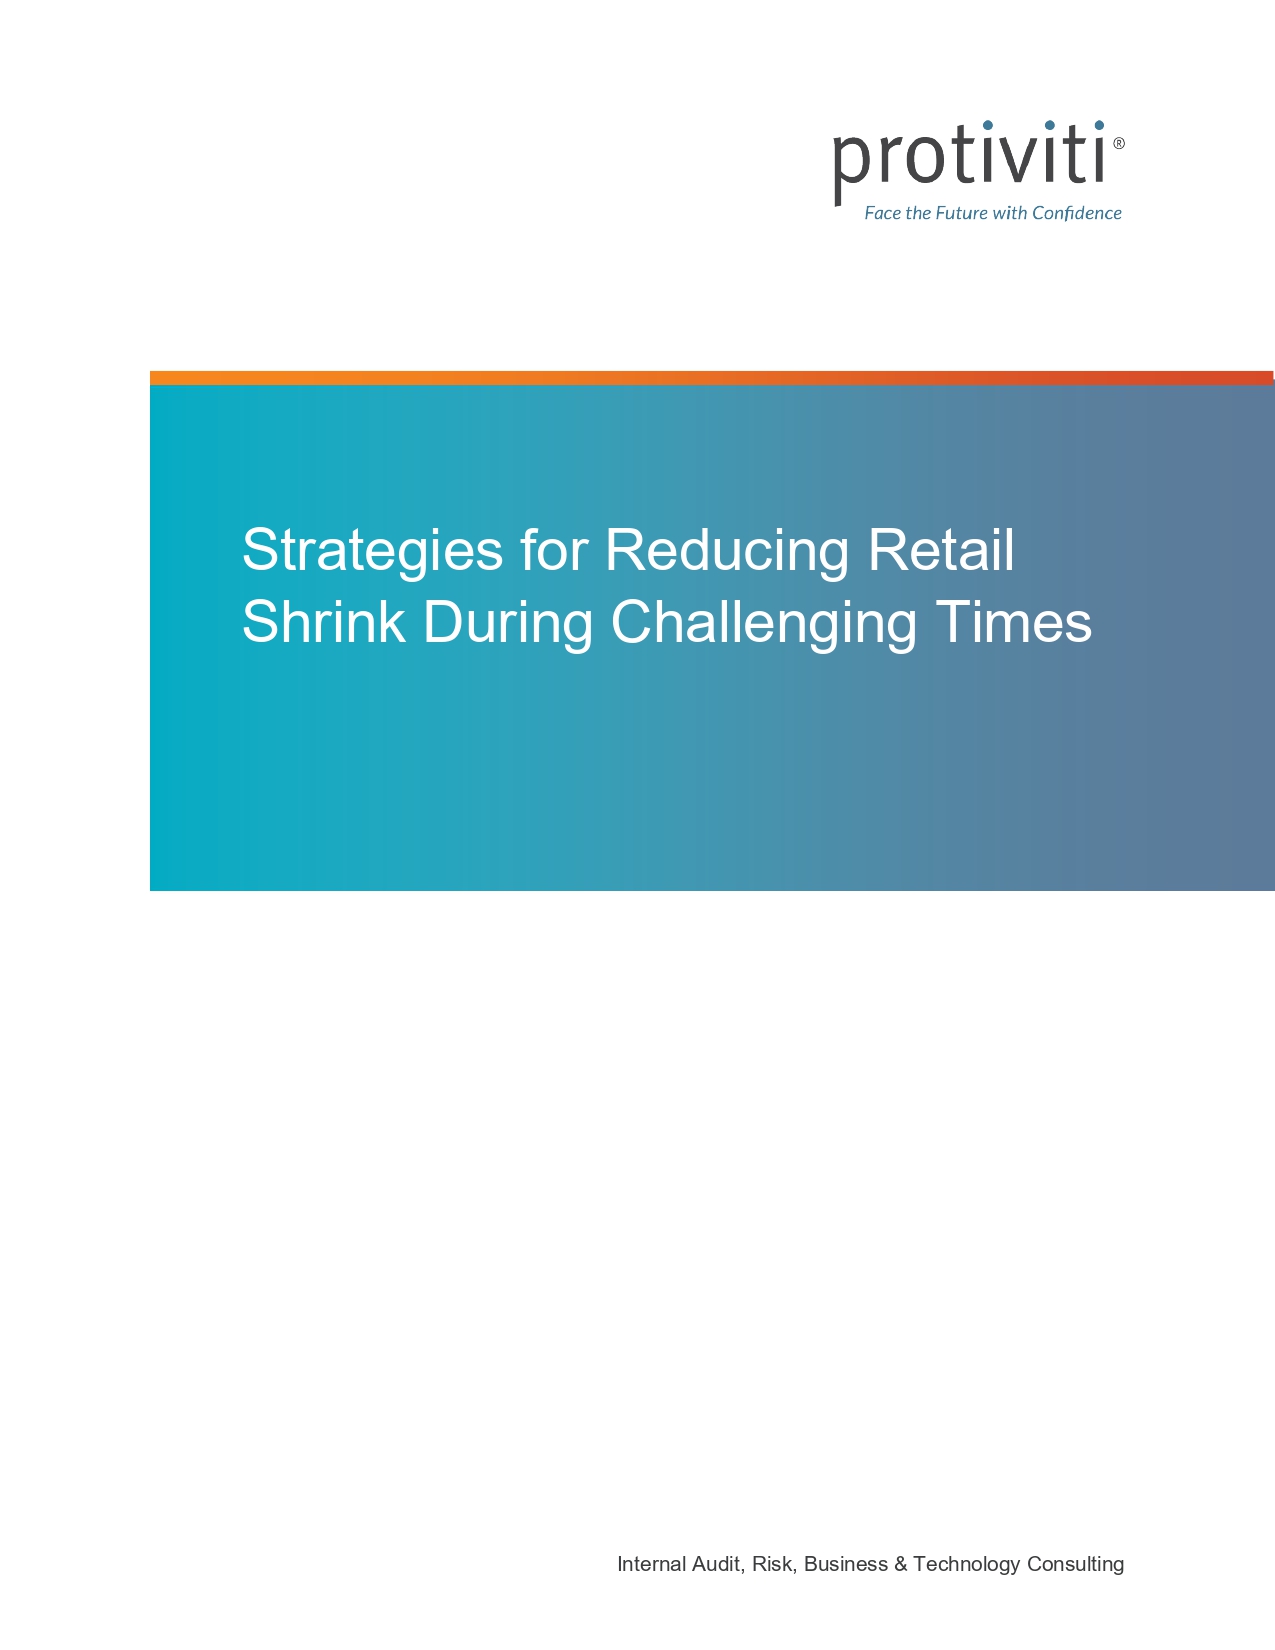 Strategies for Reducing Retail Shrink During Challenging Times